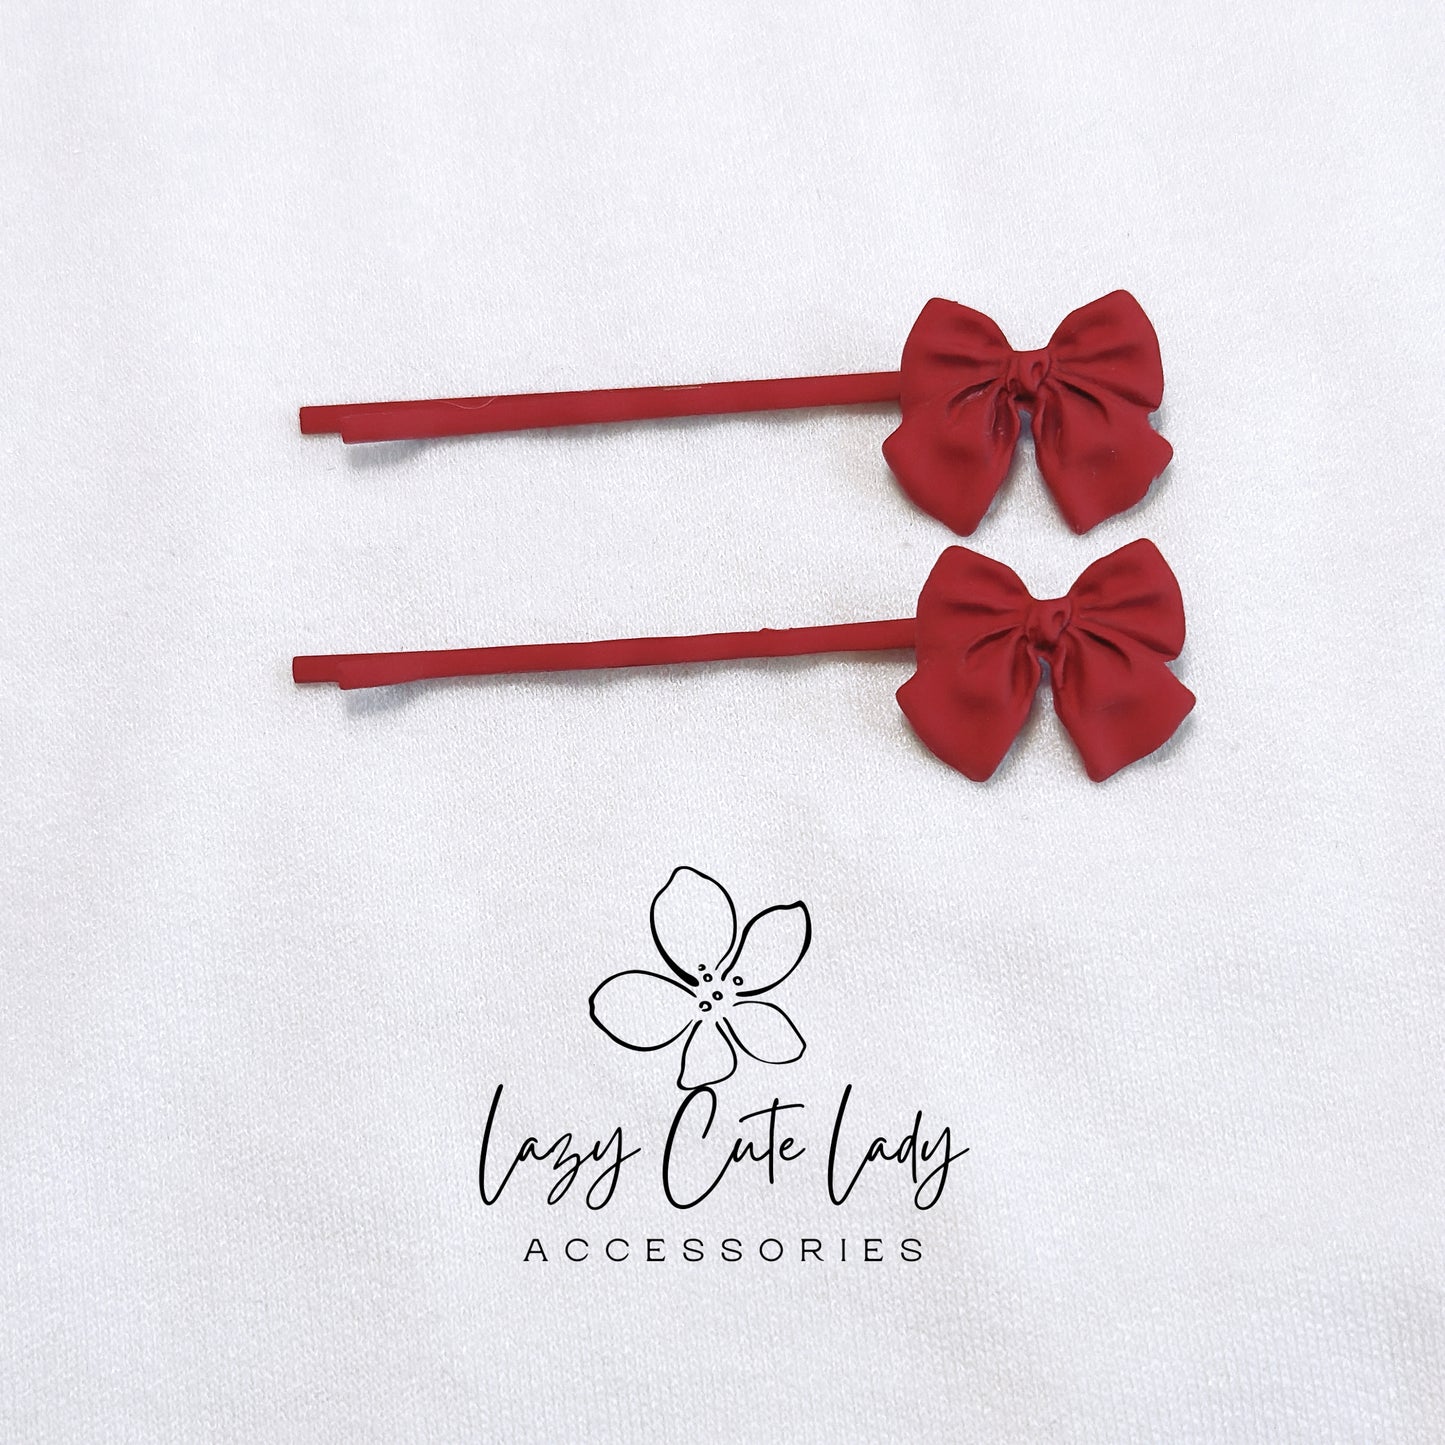 Colorful Metal Bow Hair Pin - Available in Blue and Red (2.25 Inches)